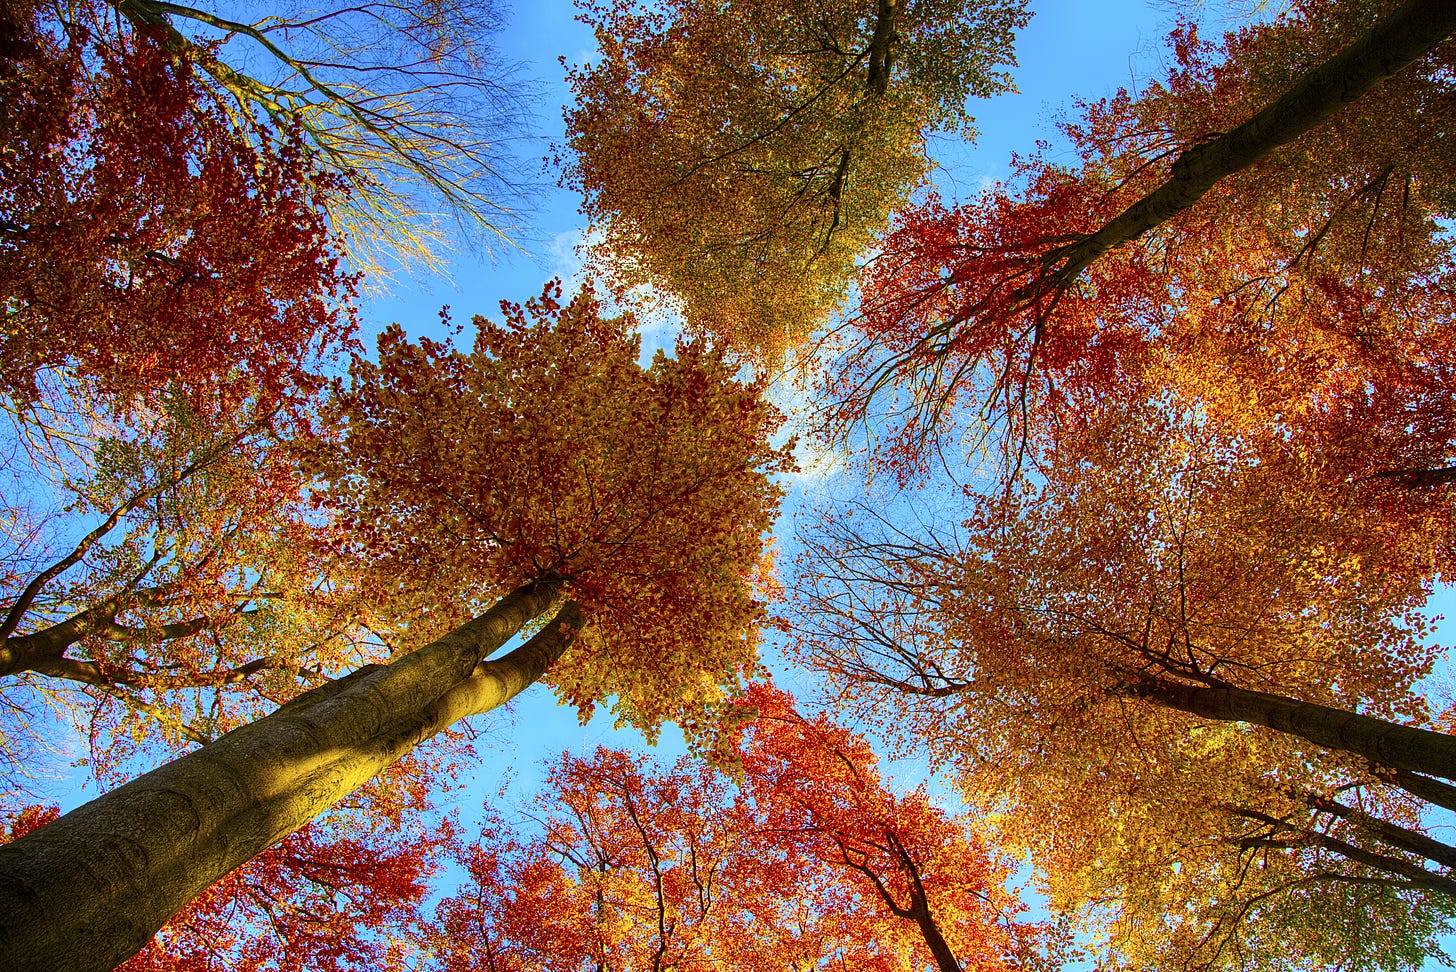 Numerous beeches with bright yellow and red fall colors, photographed from low on the ground upward.